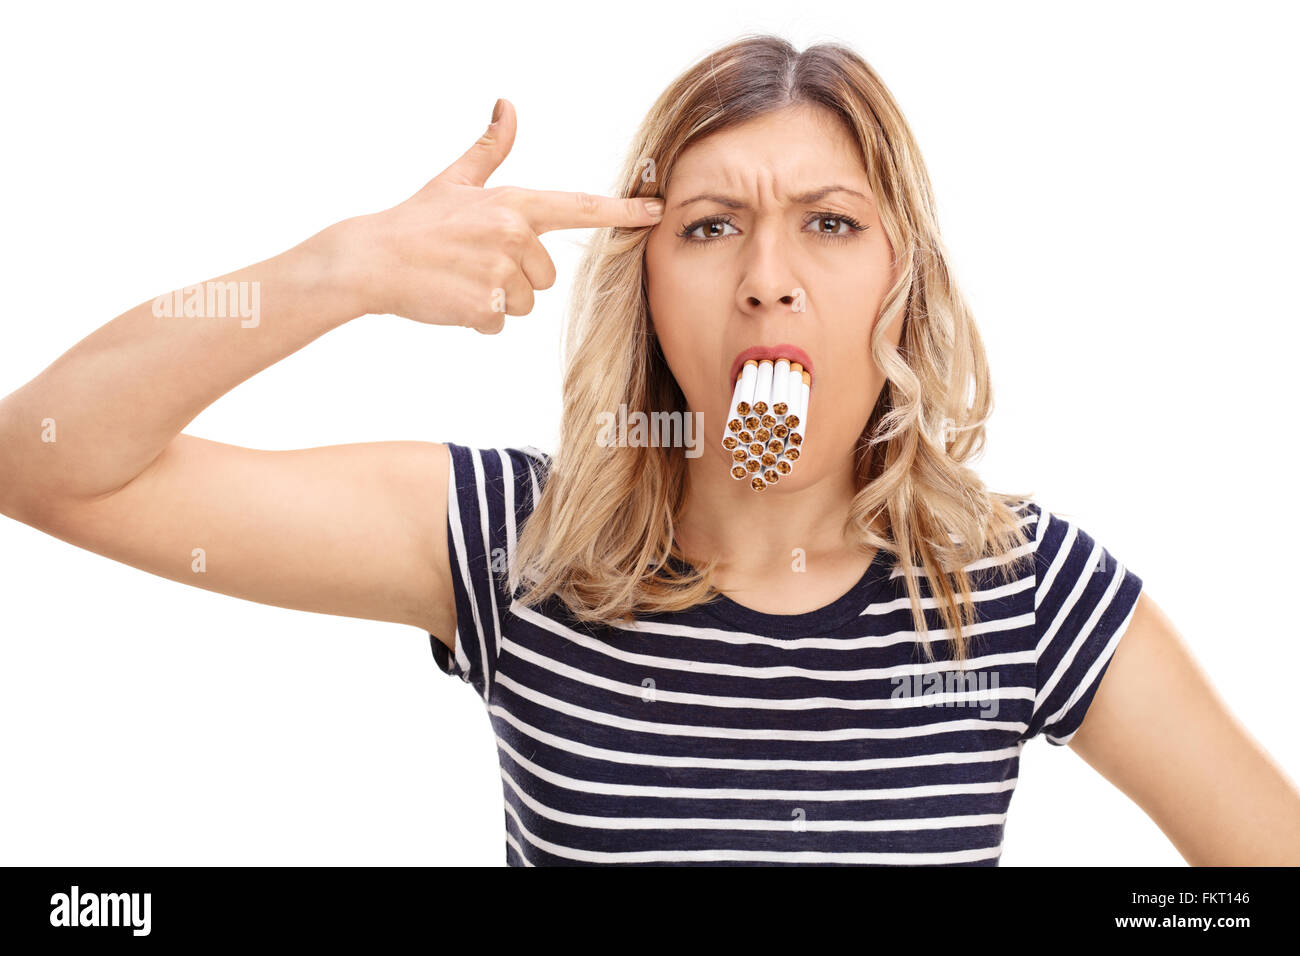 Blond woman with a bunch of cigarettes in her mouth holding a hand gun on her head isolated on white background Stock Photo